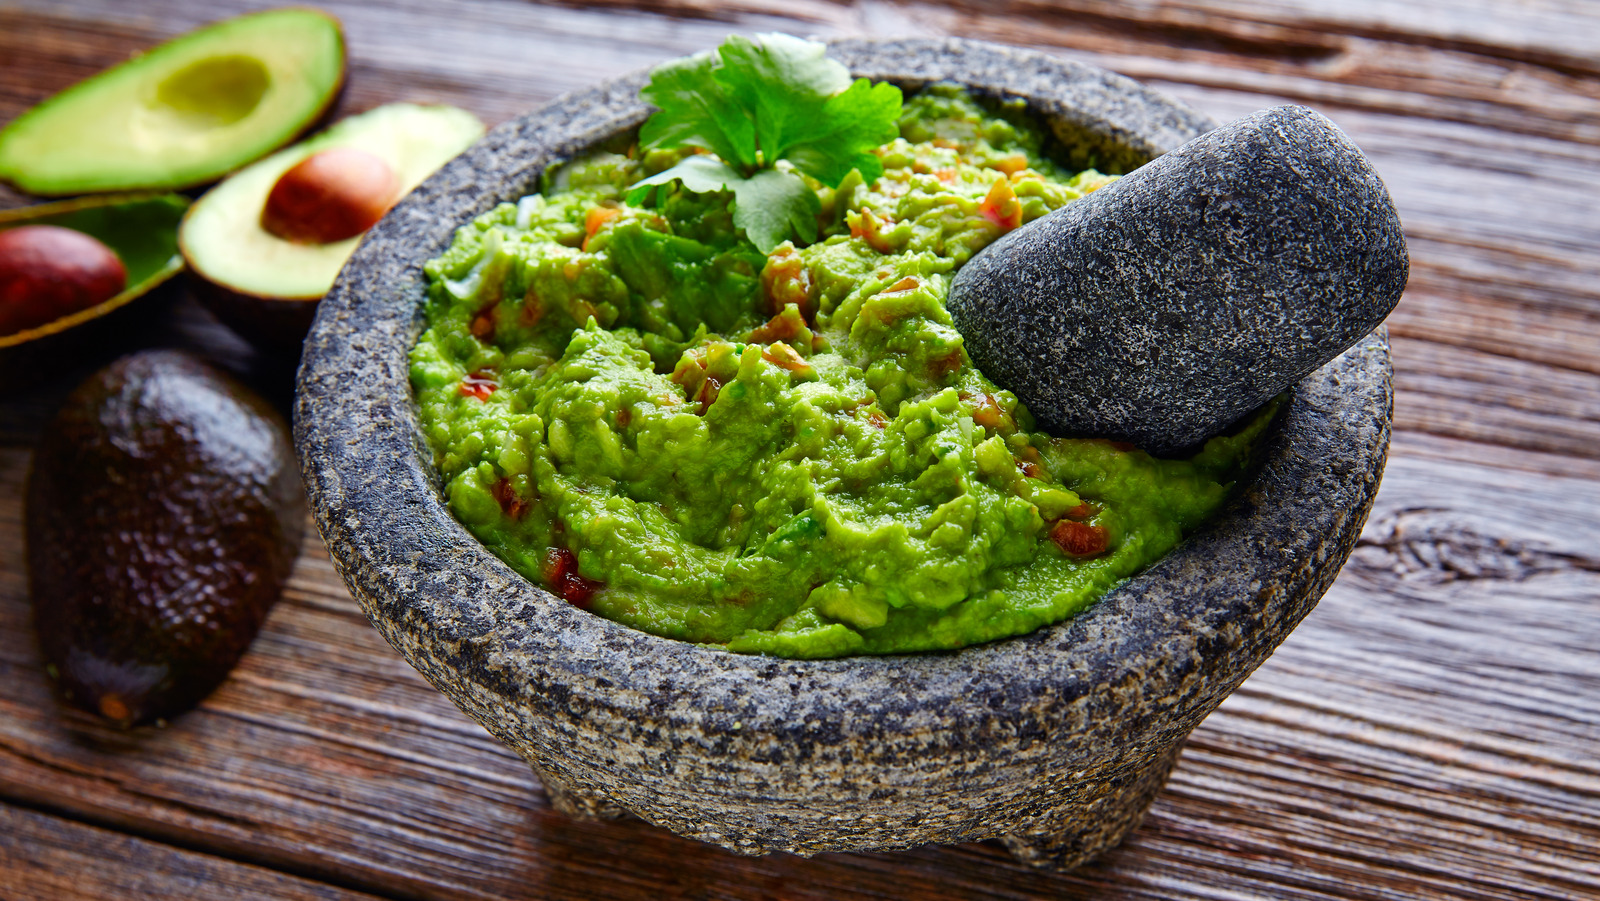 https://www.thedailymeal.com/img/gallery/12-mistakes-youre-probably-making-with-your-guacamole/l-intro-1679933258.jpg